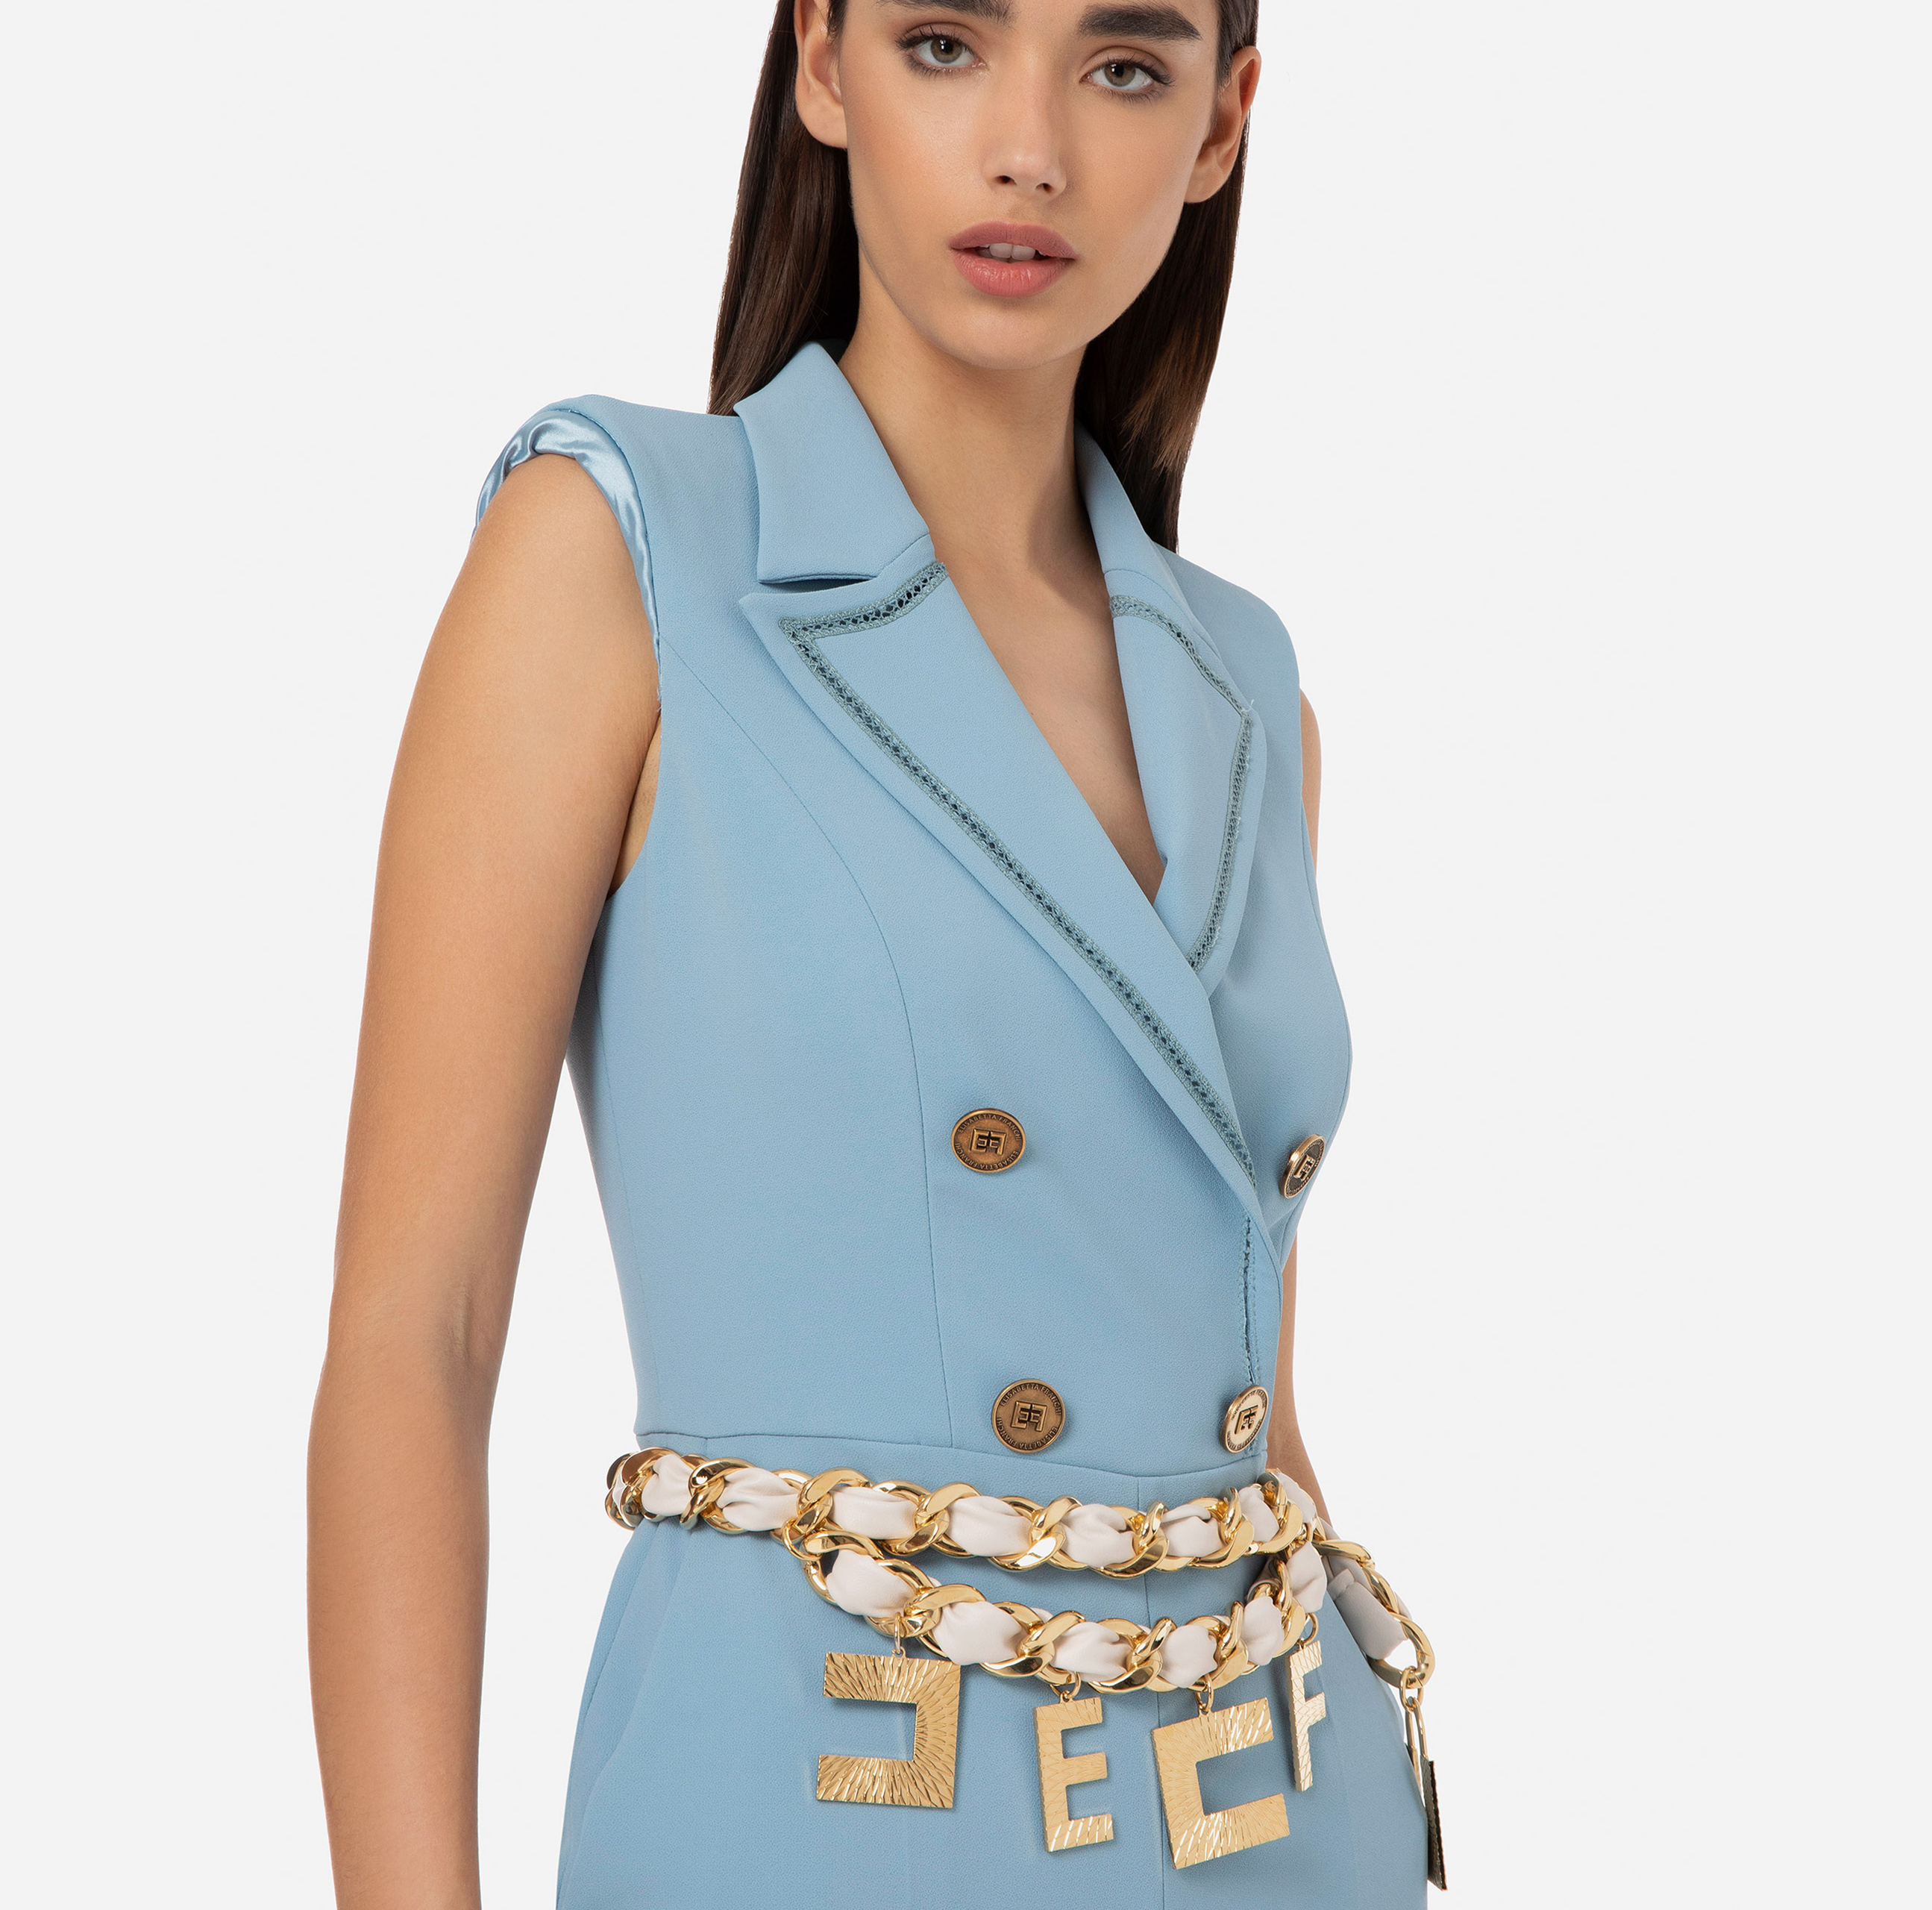 Chain belt with charms - Elisabetta Franchi